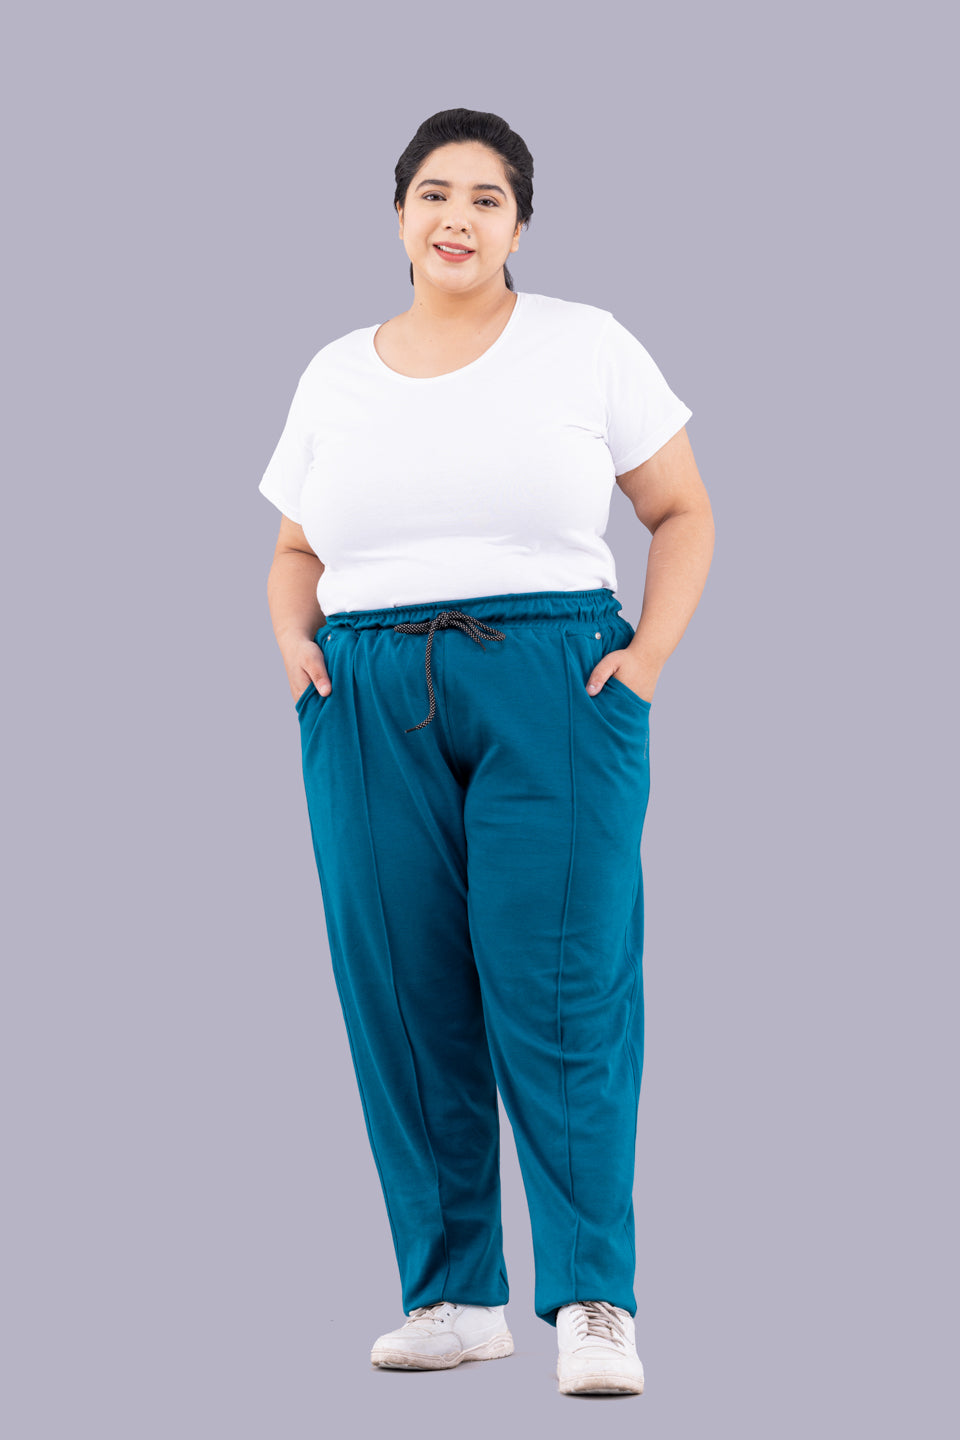 Buy Regular Fit Cotton Imperial Blue Track pants for Women online in India  - Cupidclothings – Cupid Clothings